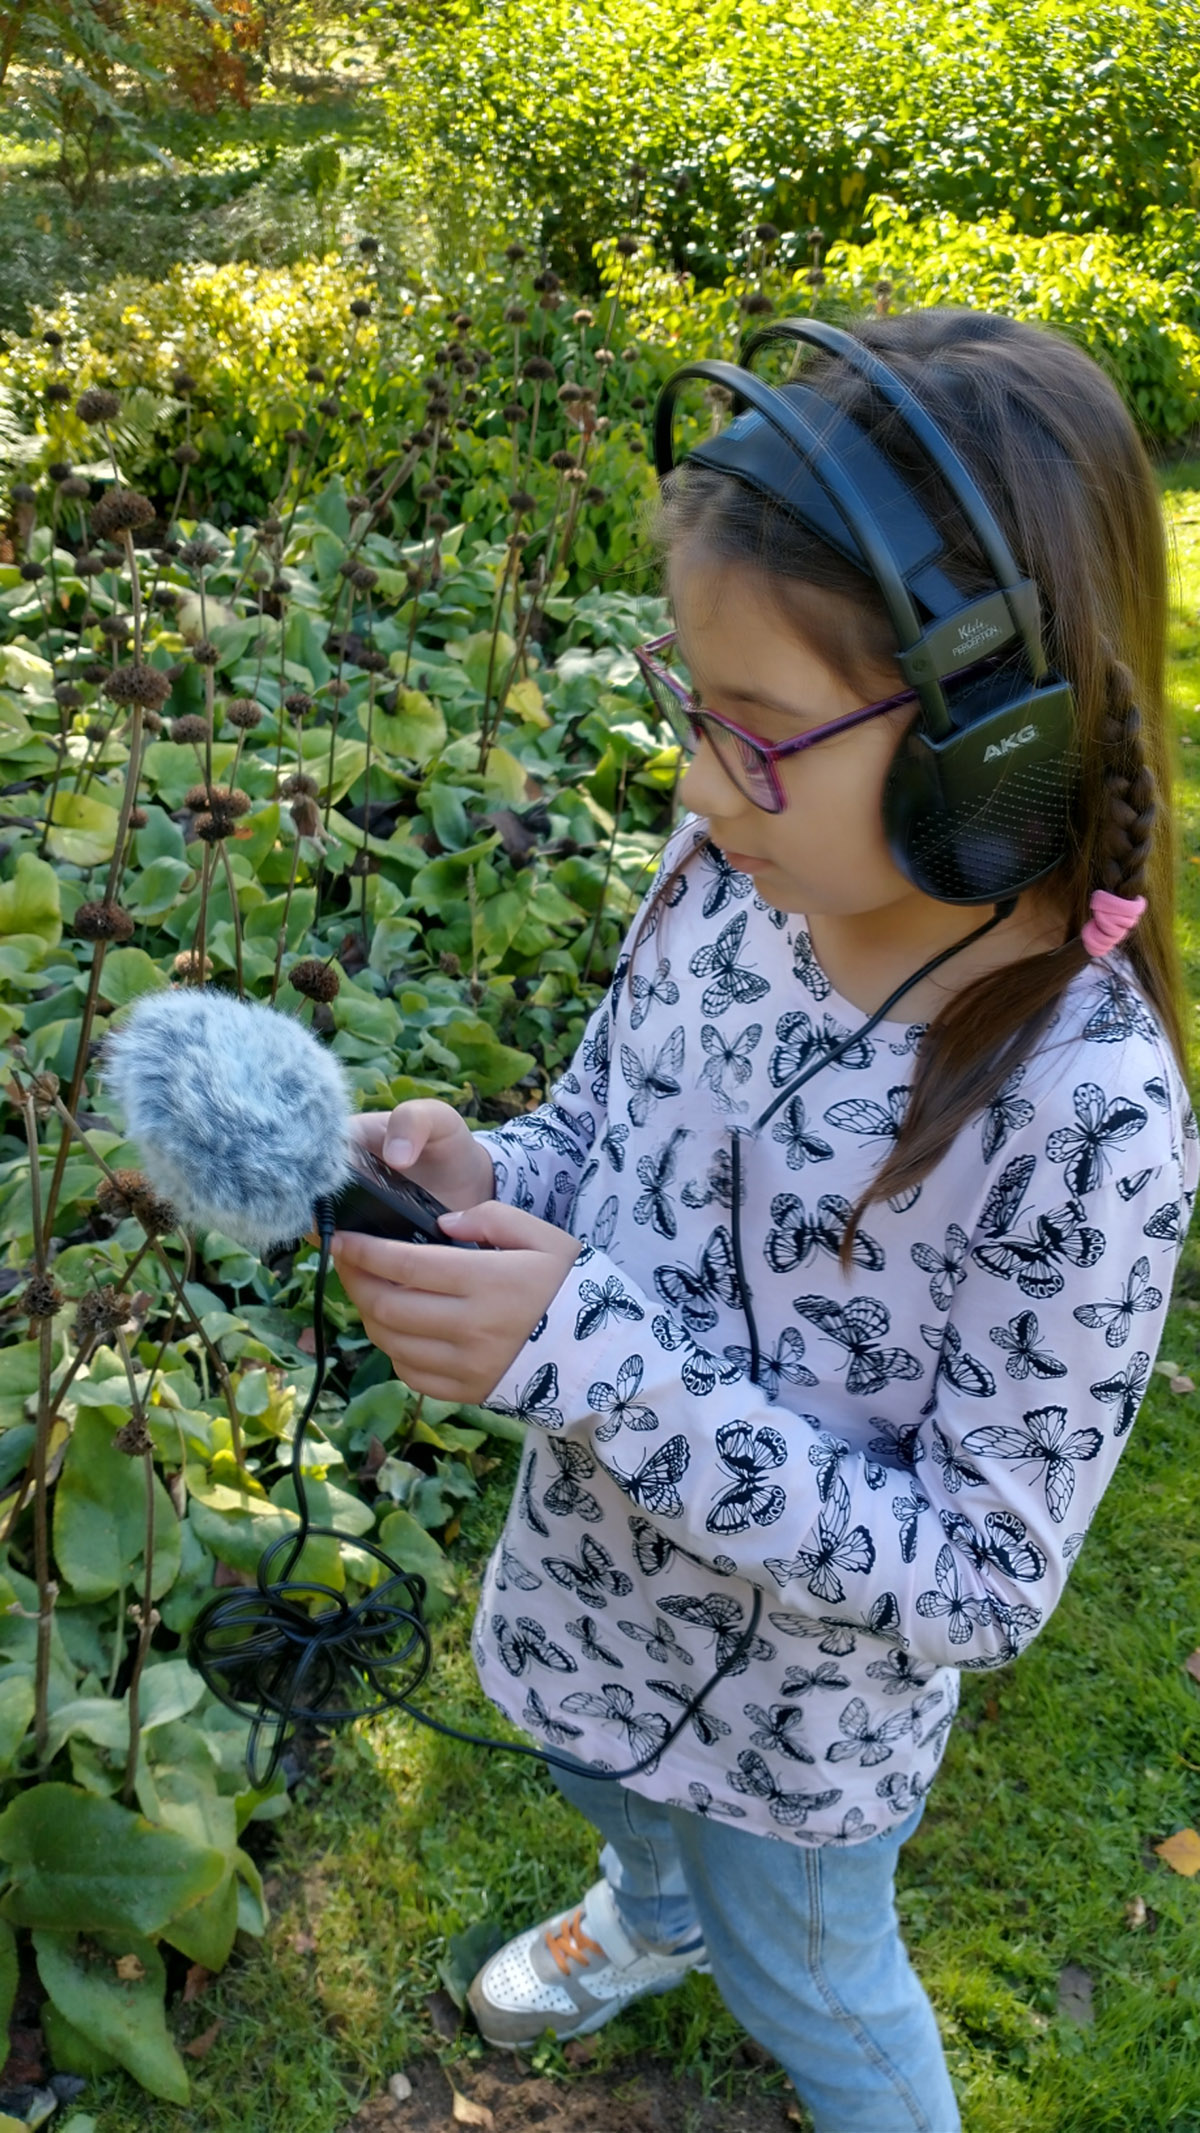 Girl, wearing headphones and a white top with blue butterflies on it, holding a piece of audio equipment towards a plant